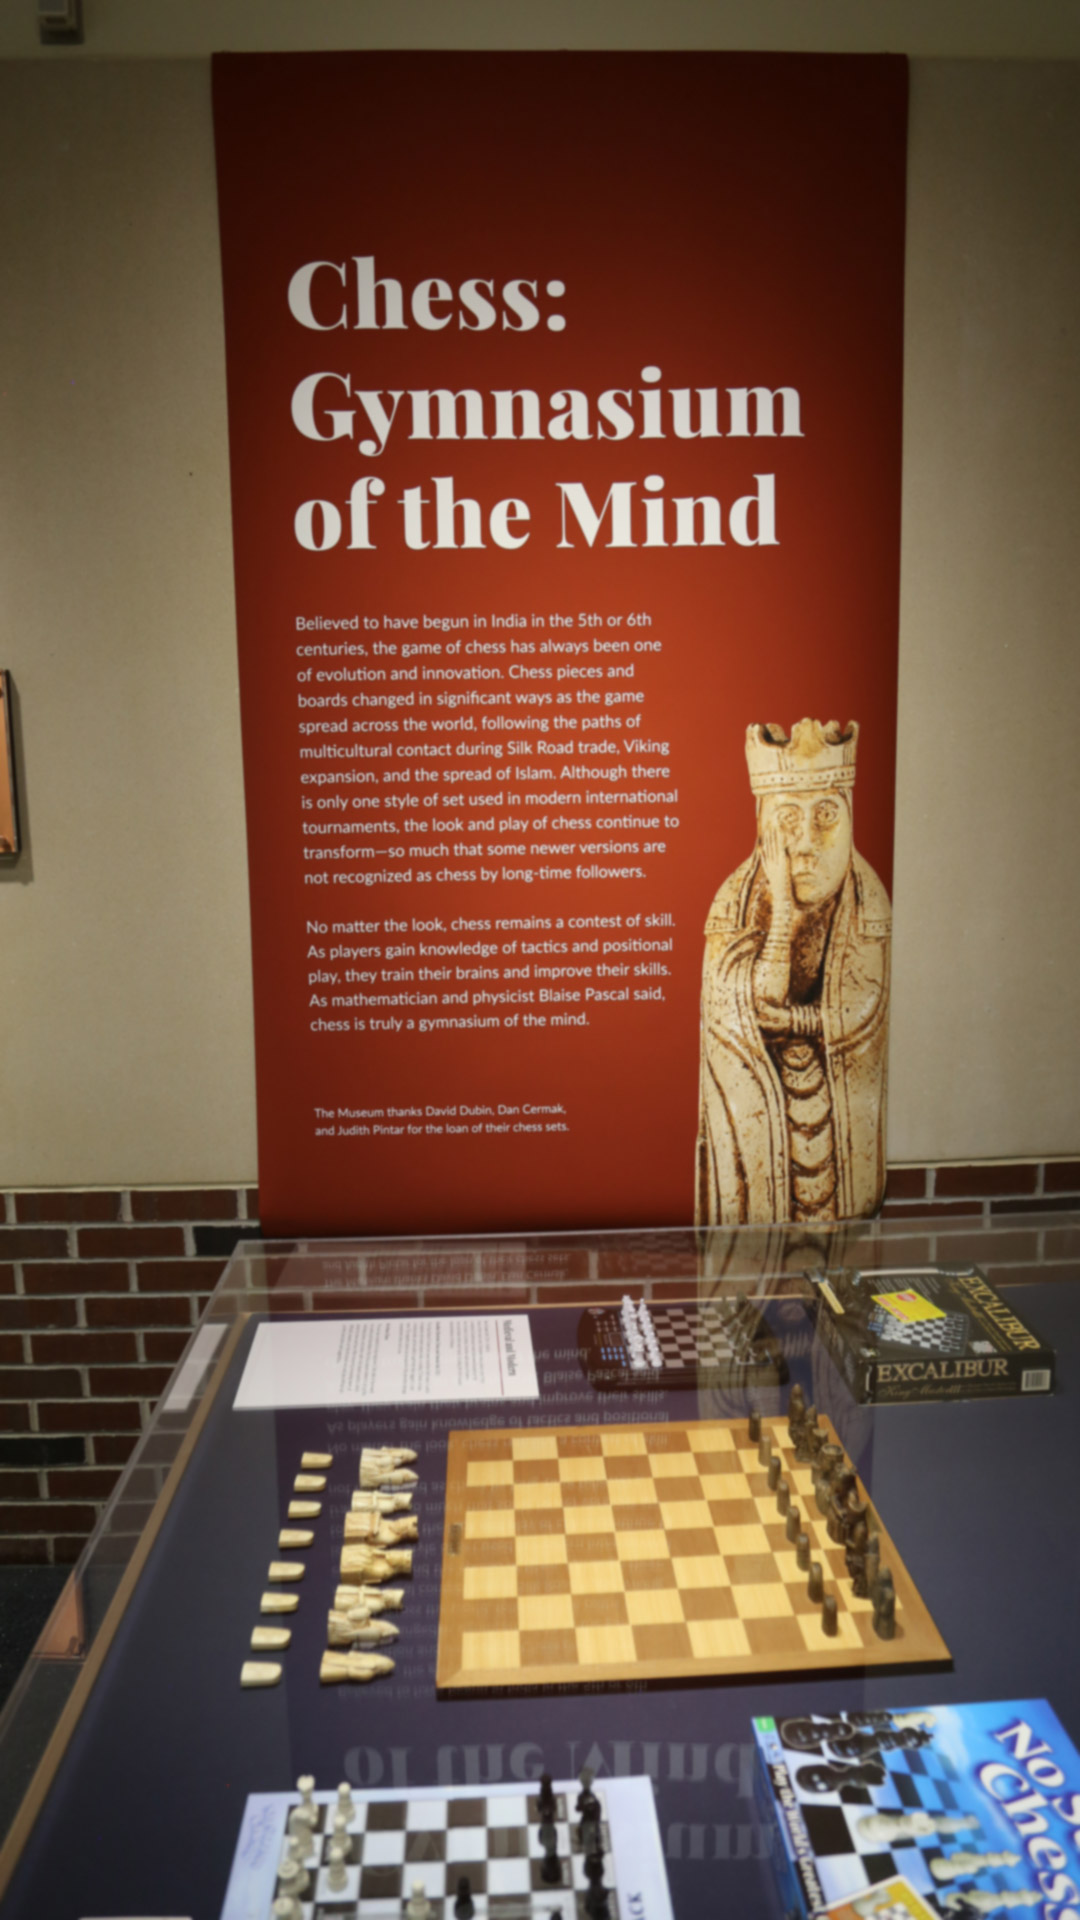 Essays & Notes - Welcome to the Chess Museum